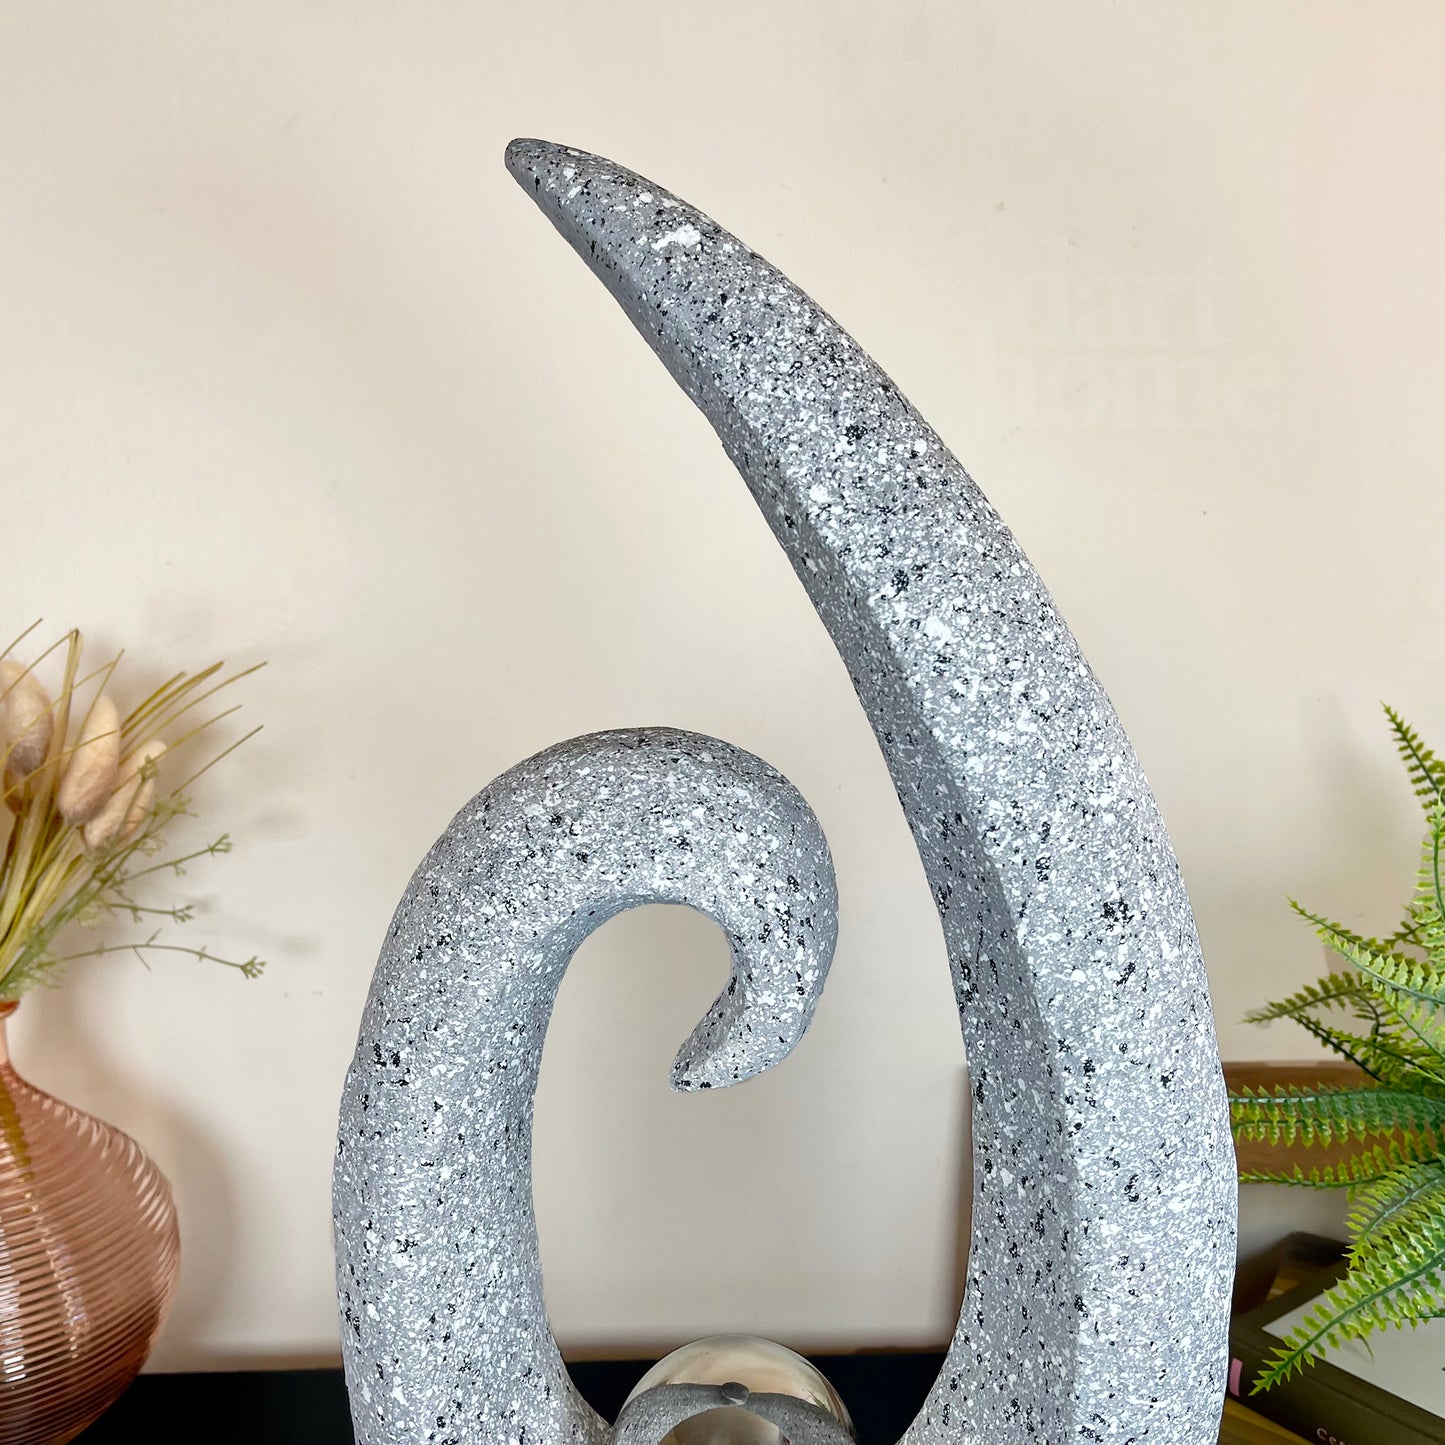 Stone Effect Abstract Wave Sculpture